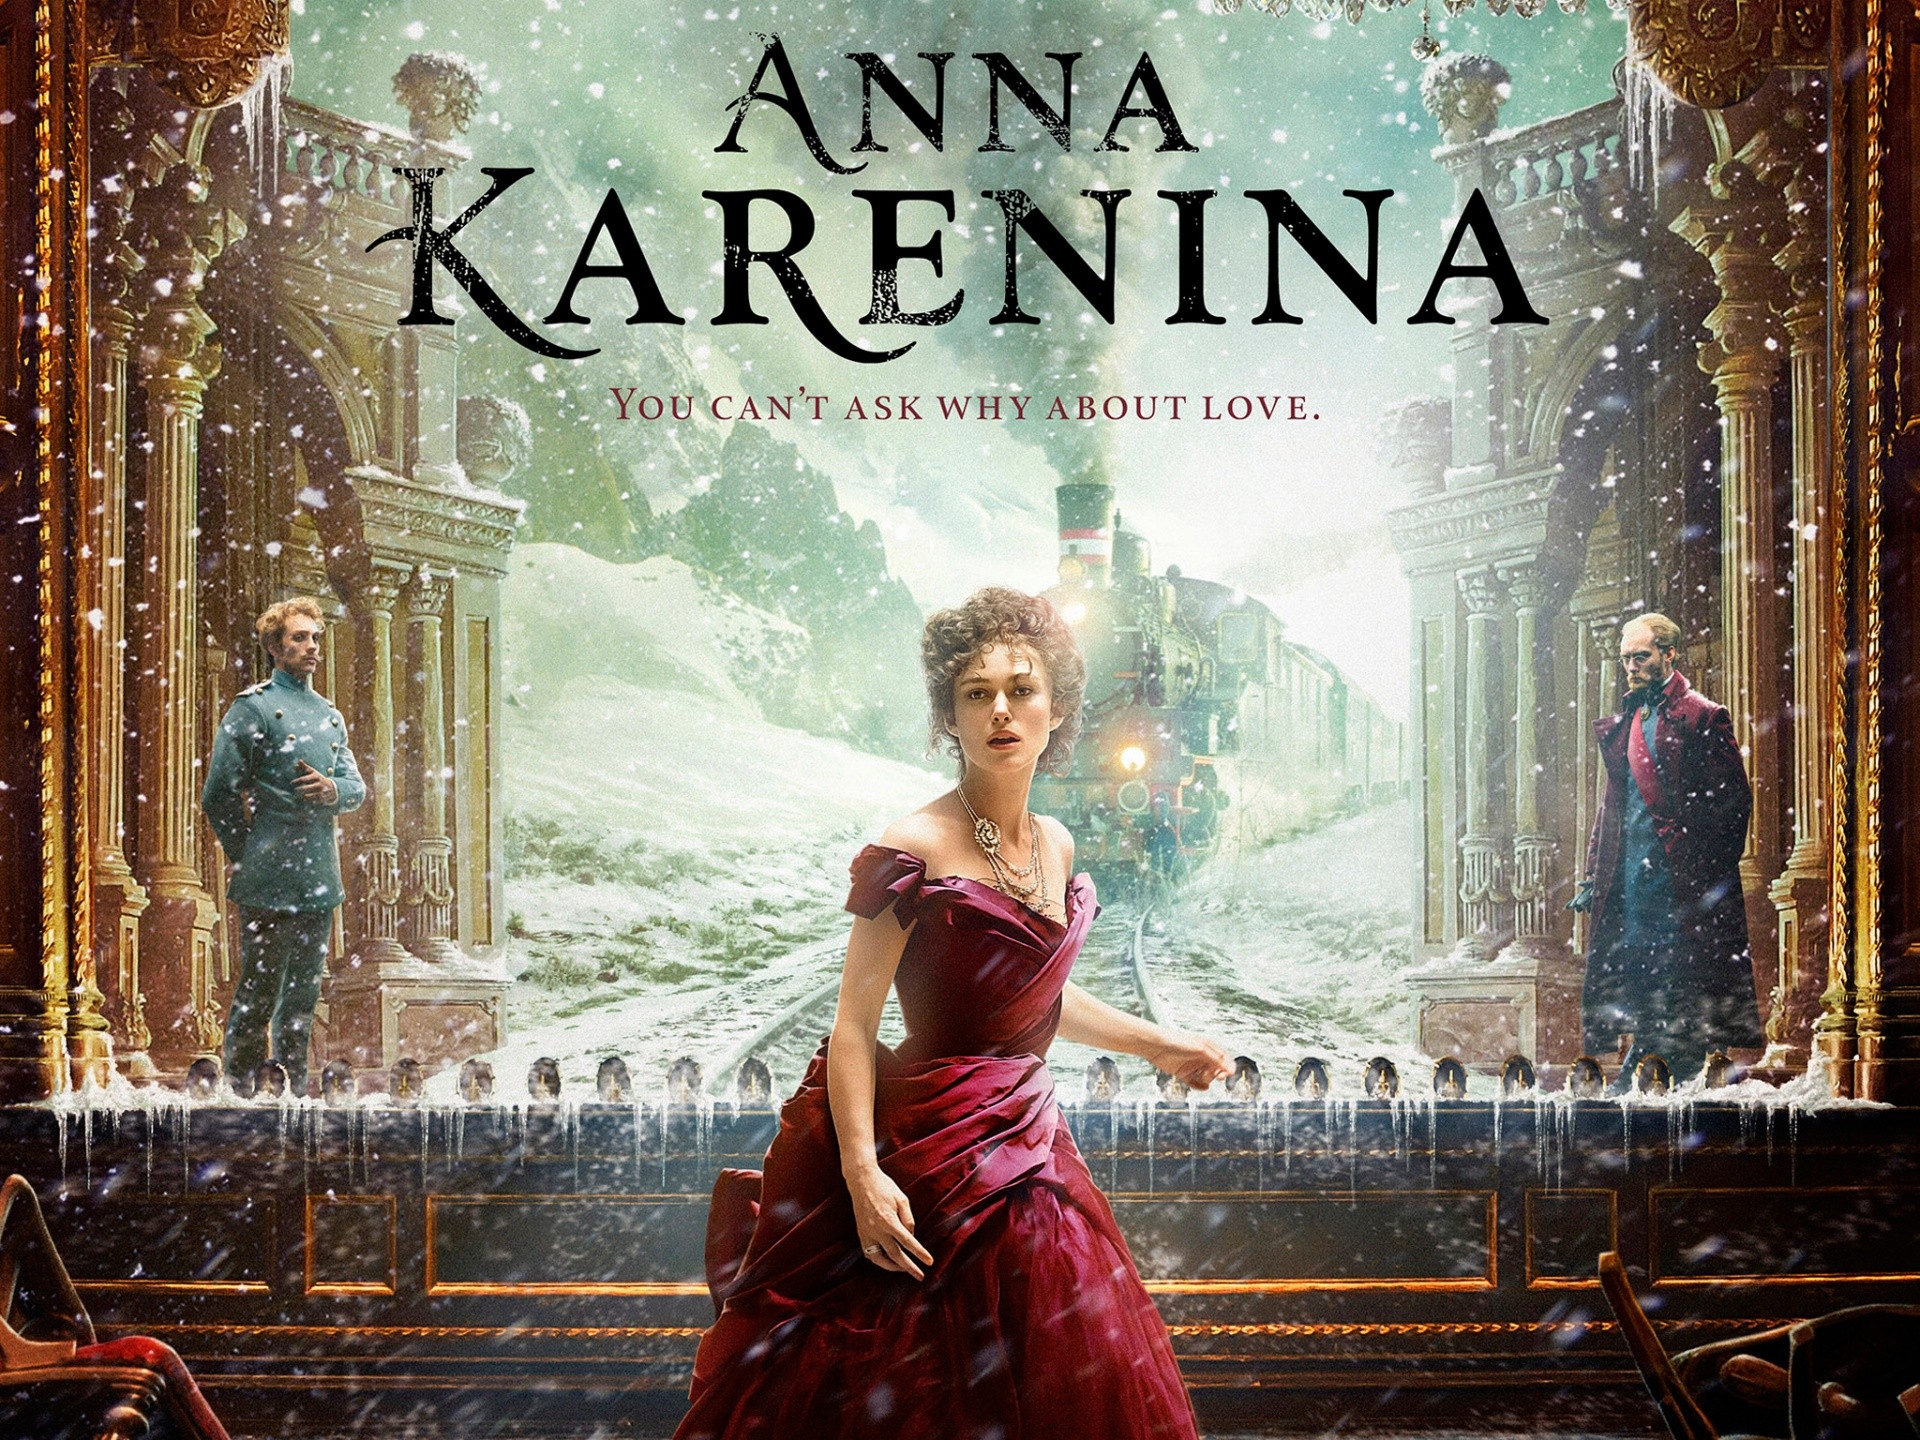 keira, Knightley, Trains, Red, Dress, Jude, Law, Movie, Posters, Stage, Palace, Classics, Russian, Romance, Anna, Karenina, Aaron, Taylor johnson Wallpaper